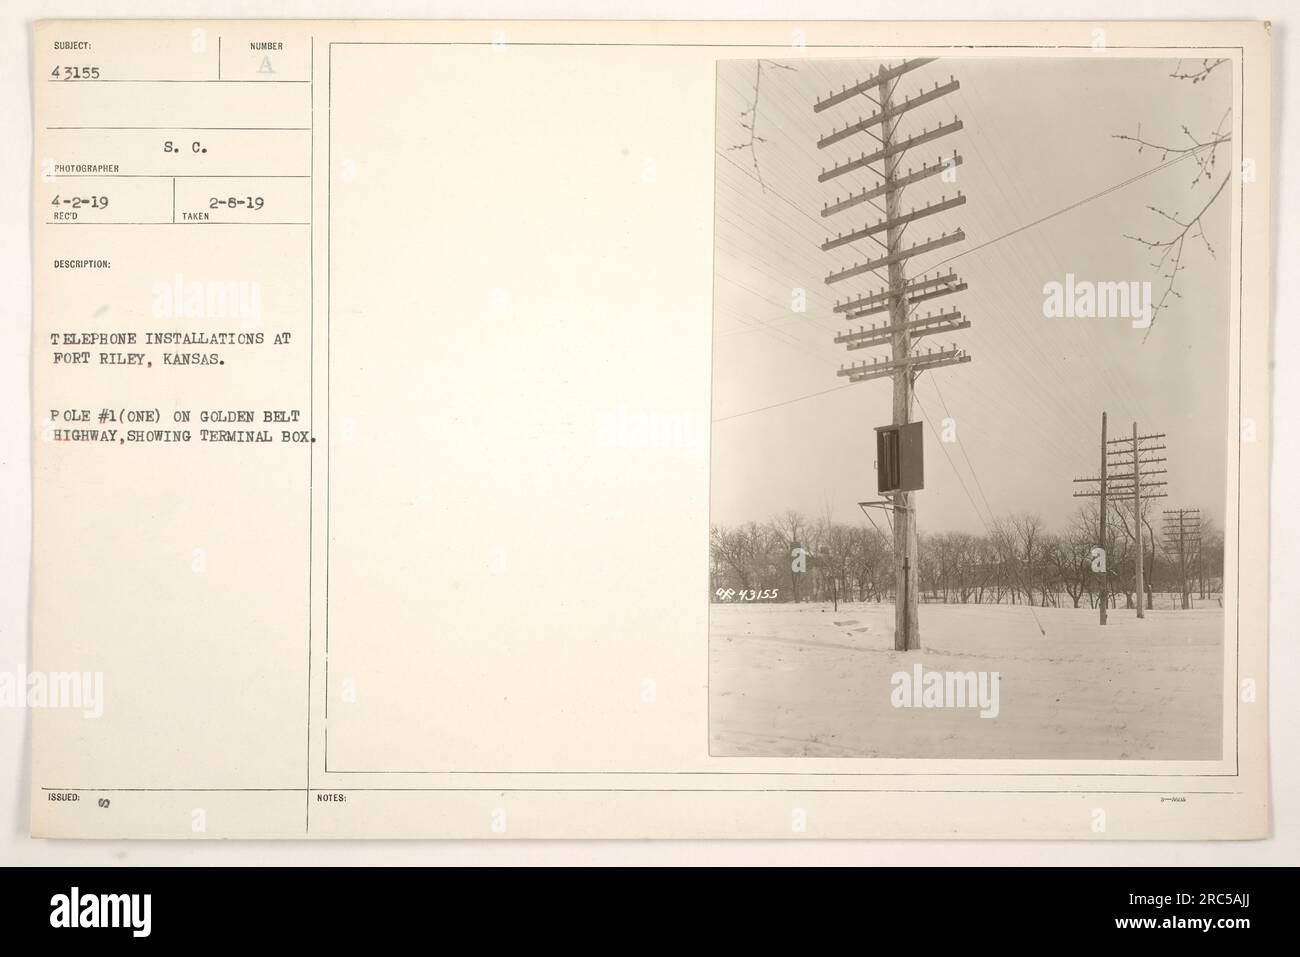 A photograph depicting a telephone installation at Fort Riley, Kansas during World War One. The image shows Pole #1 on the Golden Belt Highway with a terminal box. This image is labeled as 43155 in the S. C. Issuer collection. Stock Photo